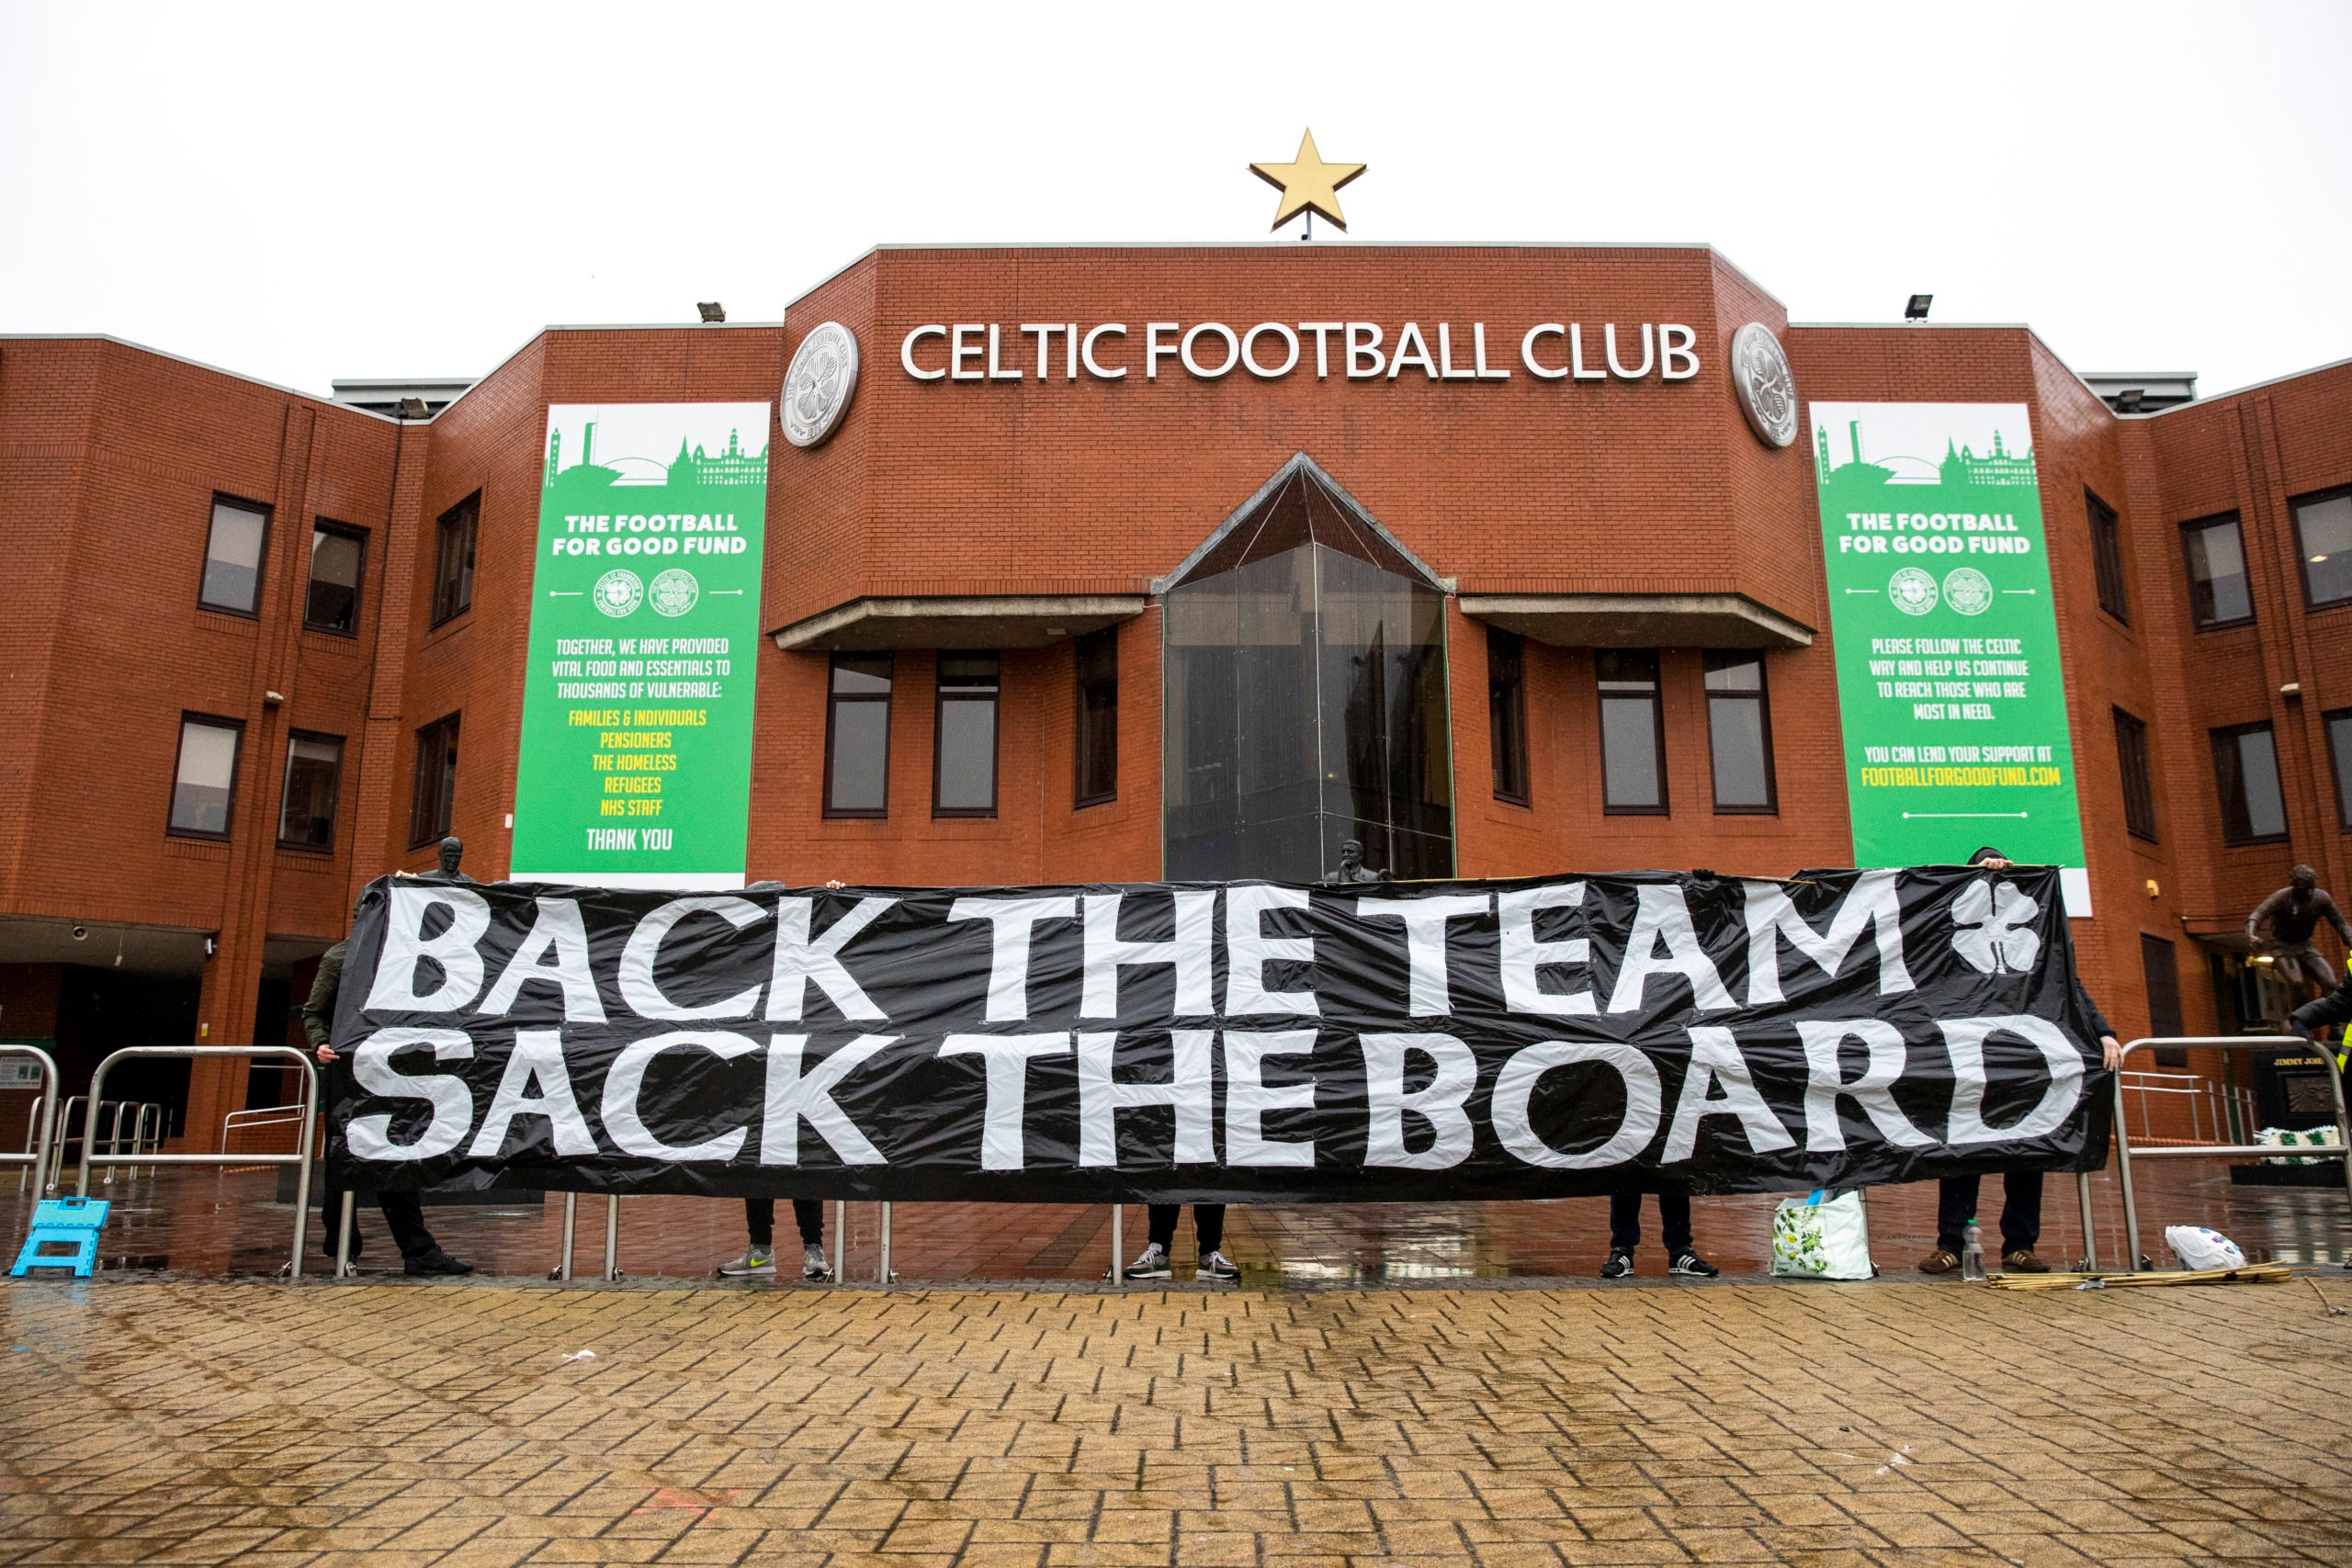 Why Celtic need a Director of Football; key issue not covered at AGM